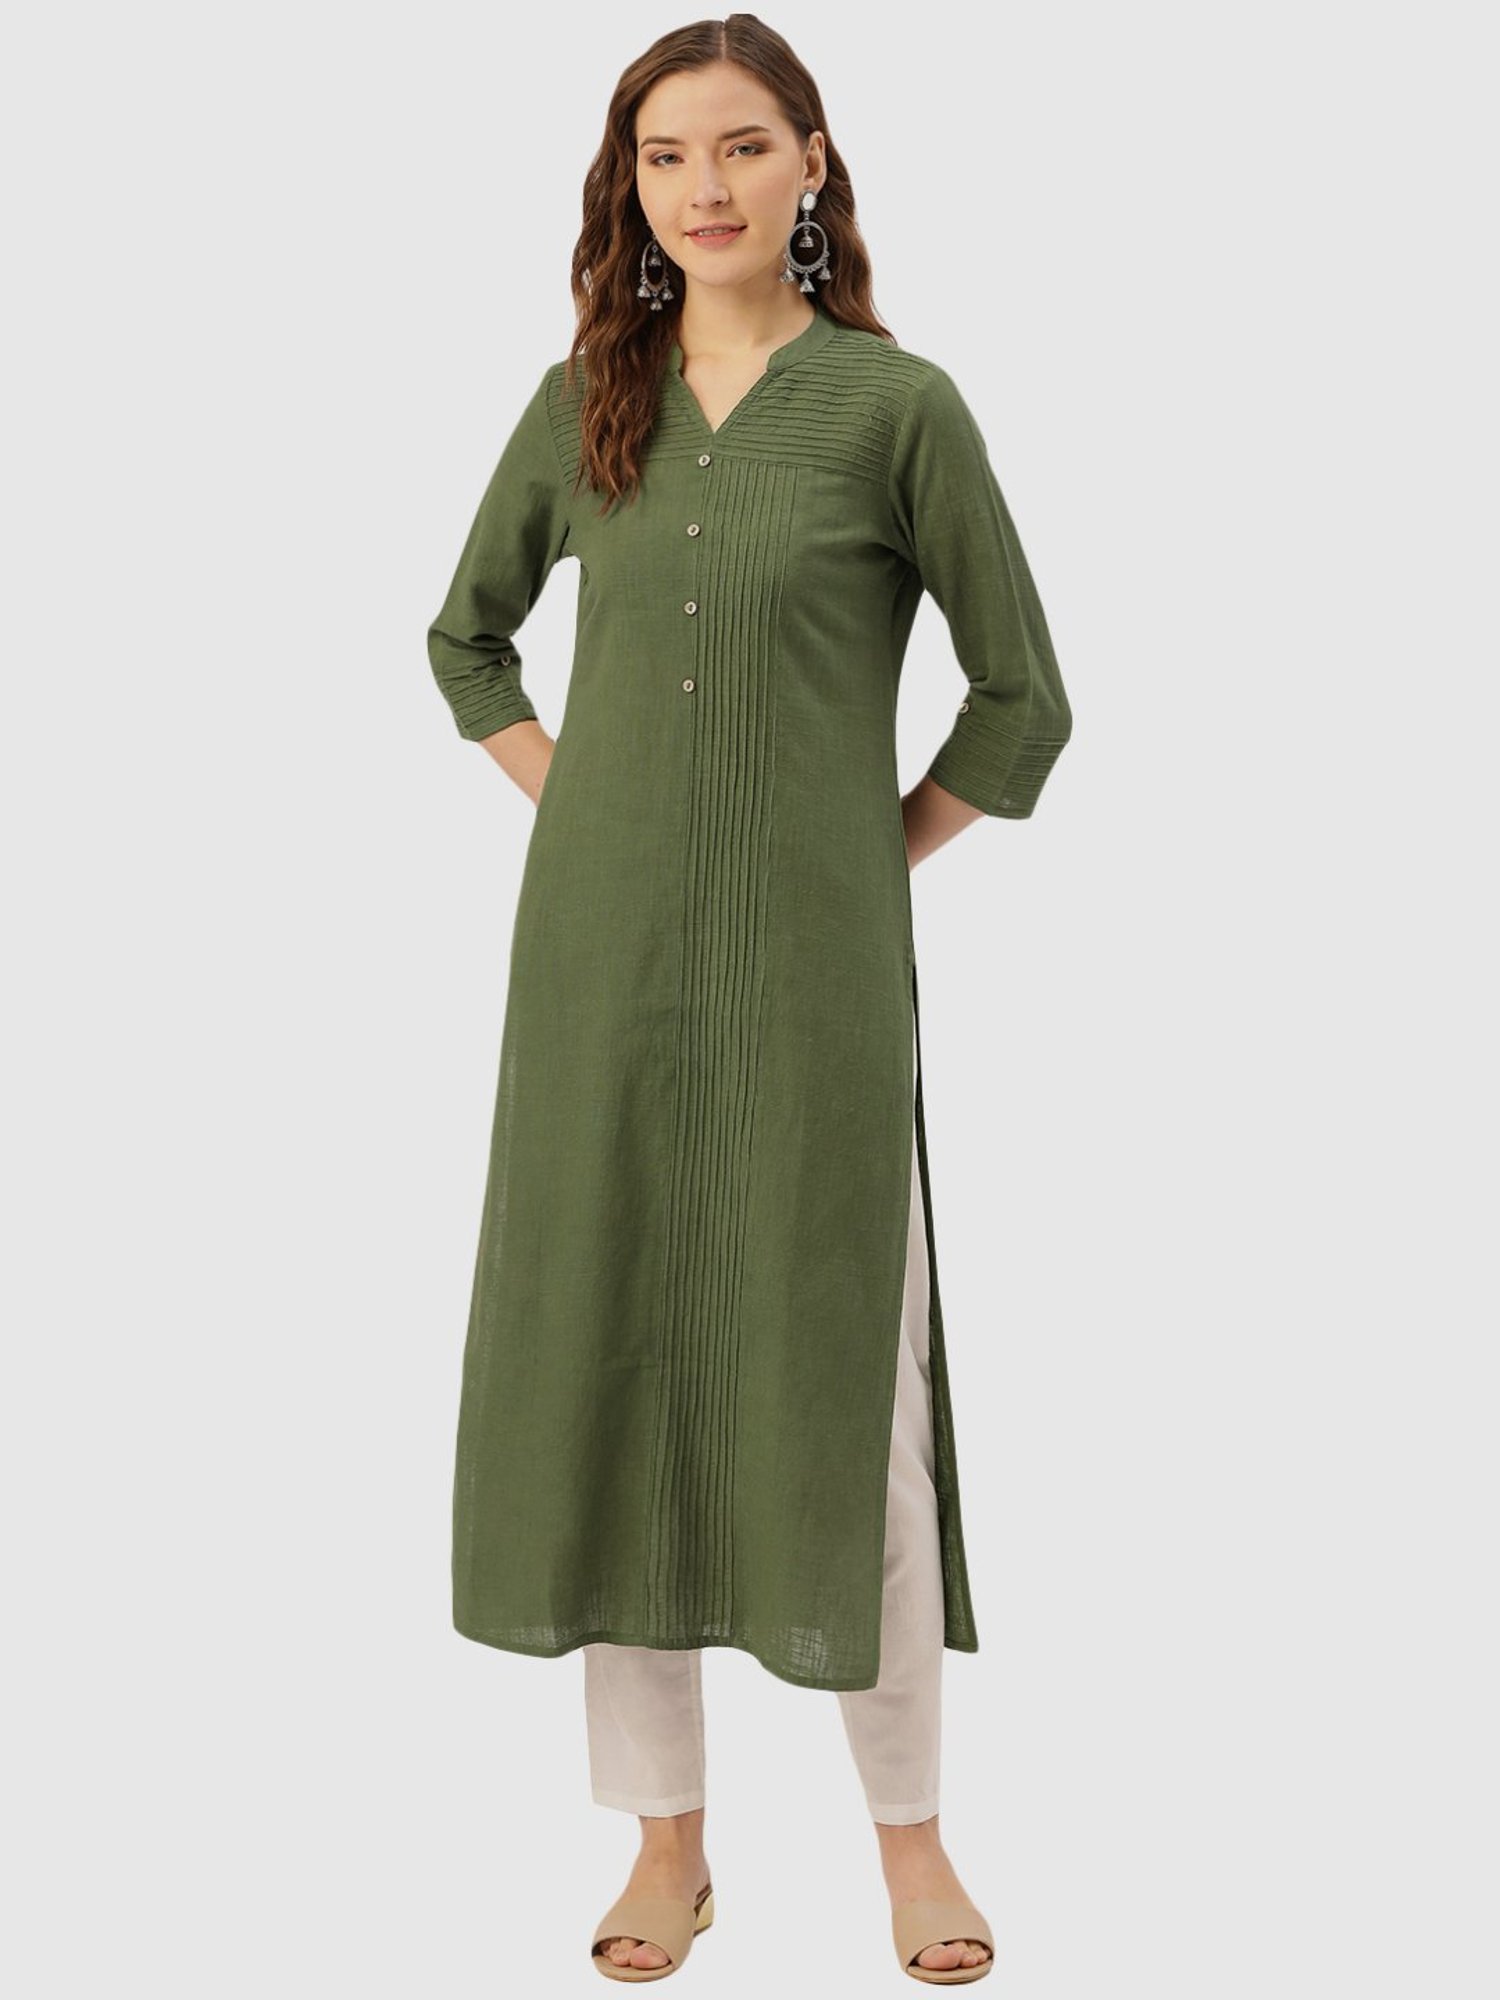 Discover 122+ olive green kurti combination